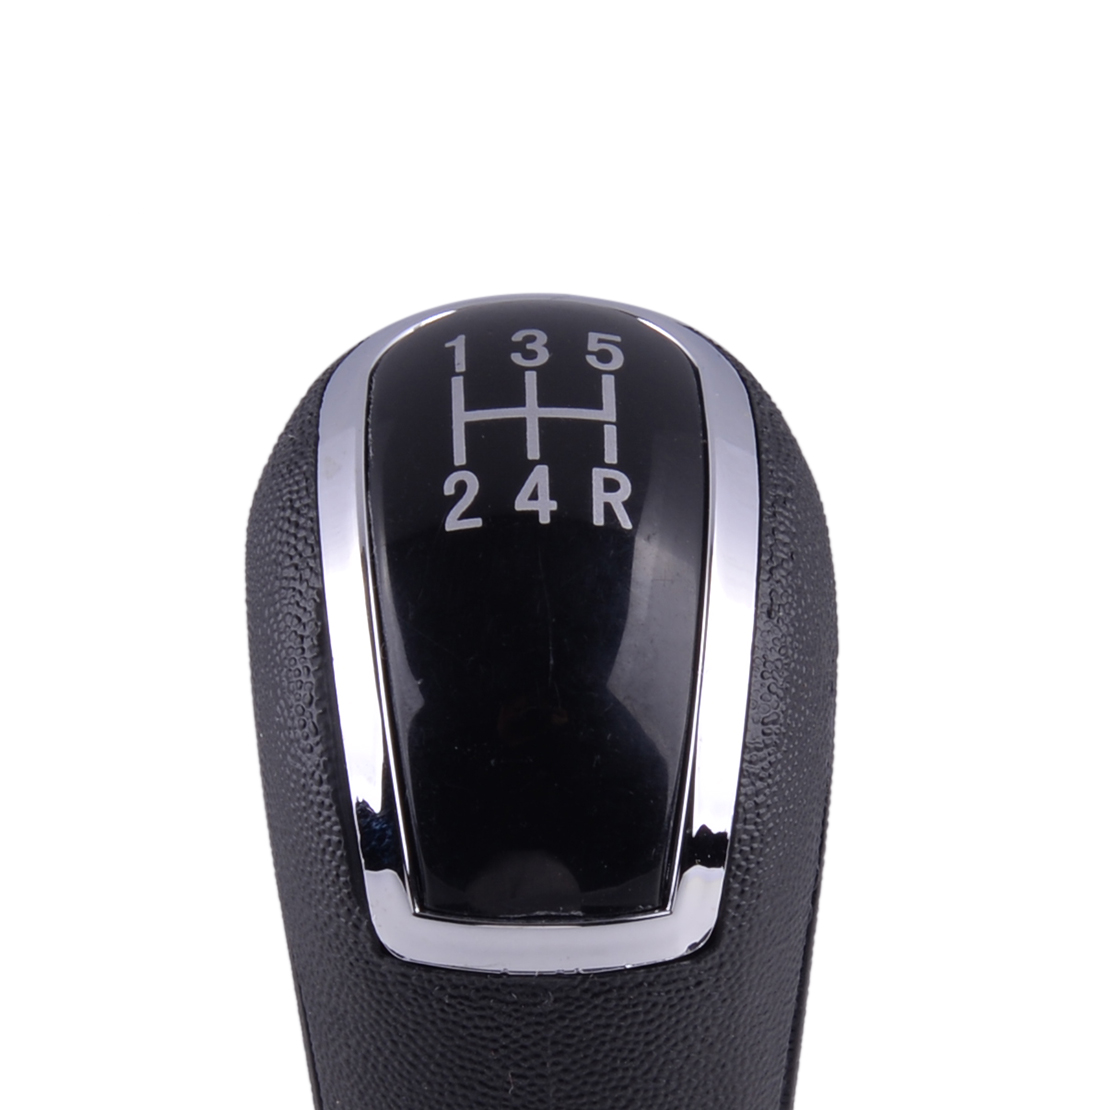 5 Speed Manual Gear Stick Shift Knob Shifter Fit For Mercedes Benz W203